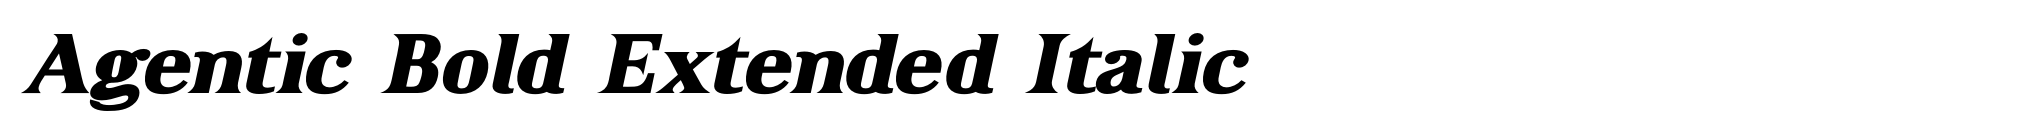 Agentic Bold Extended Italic image